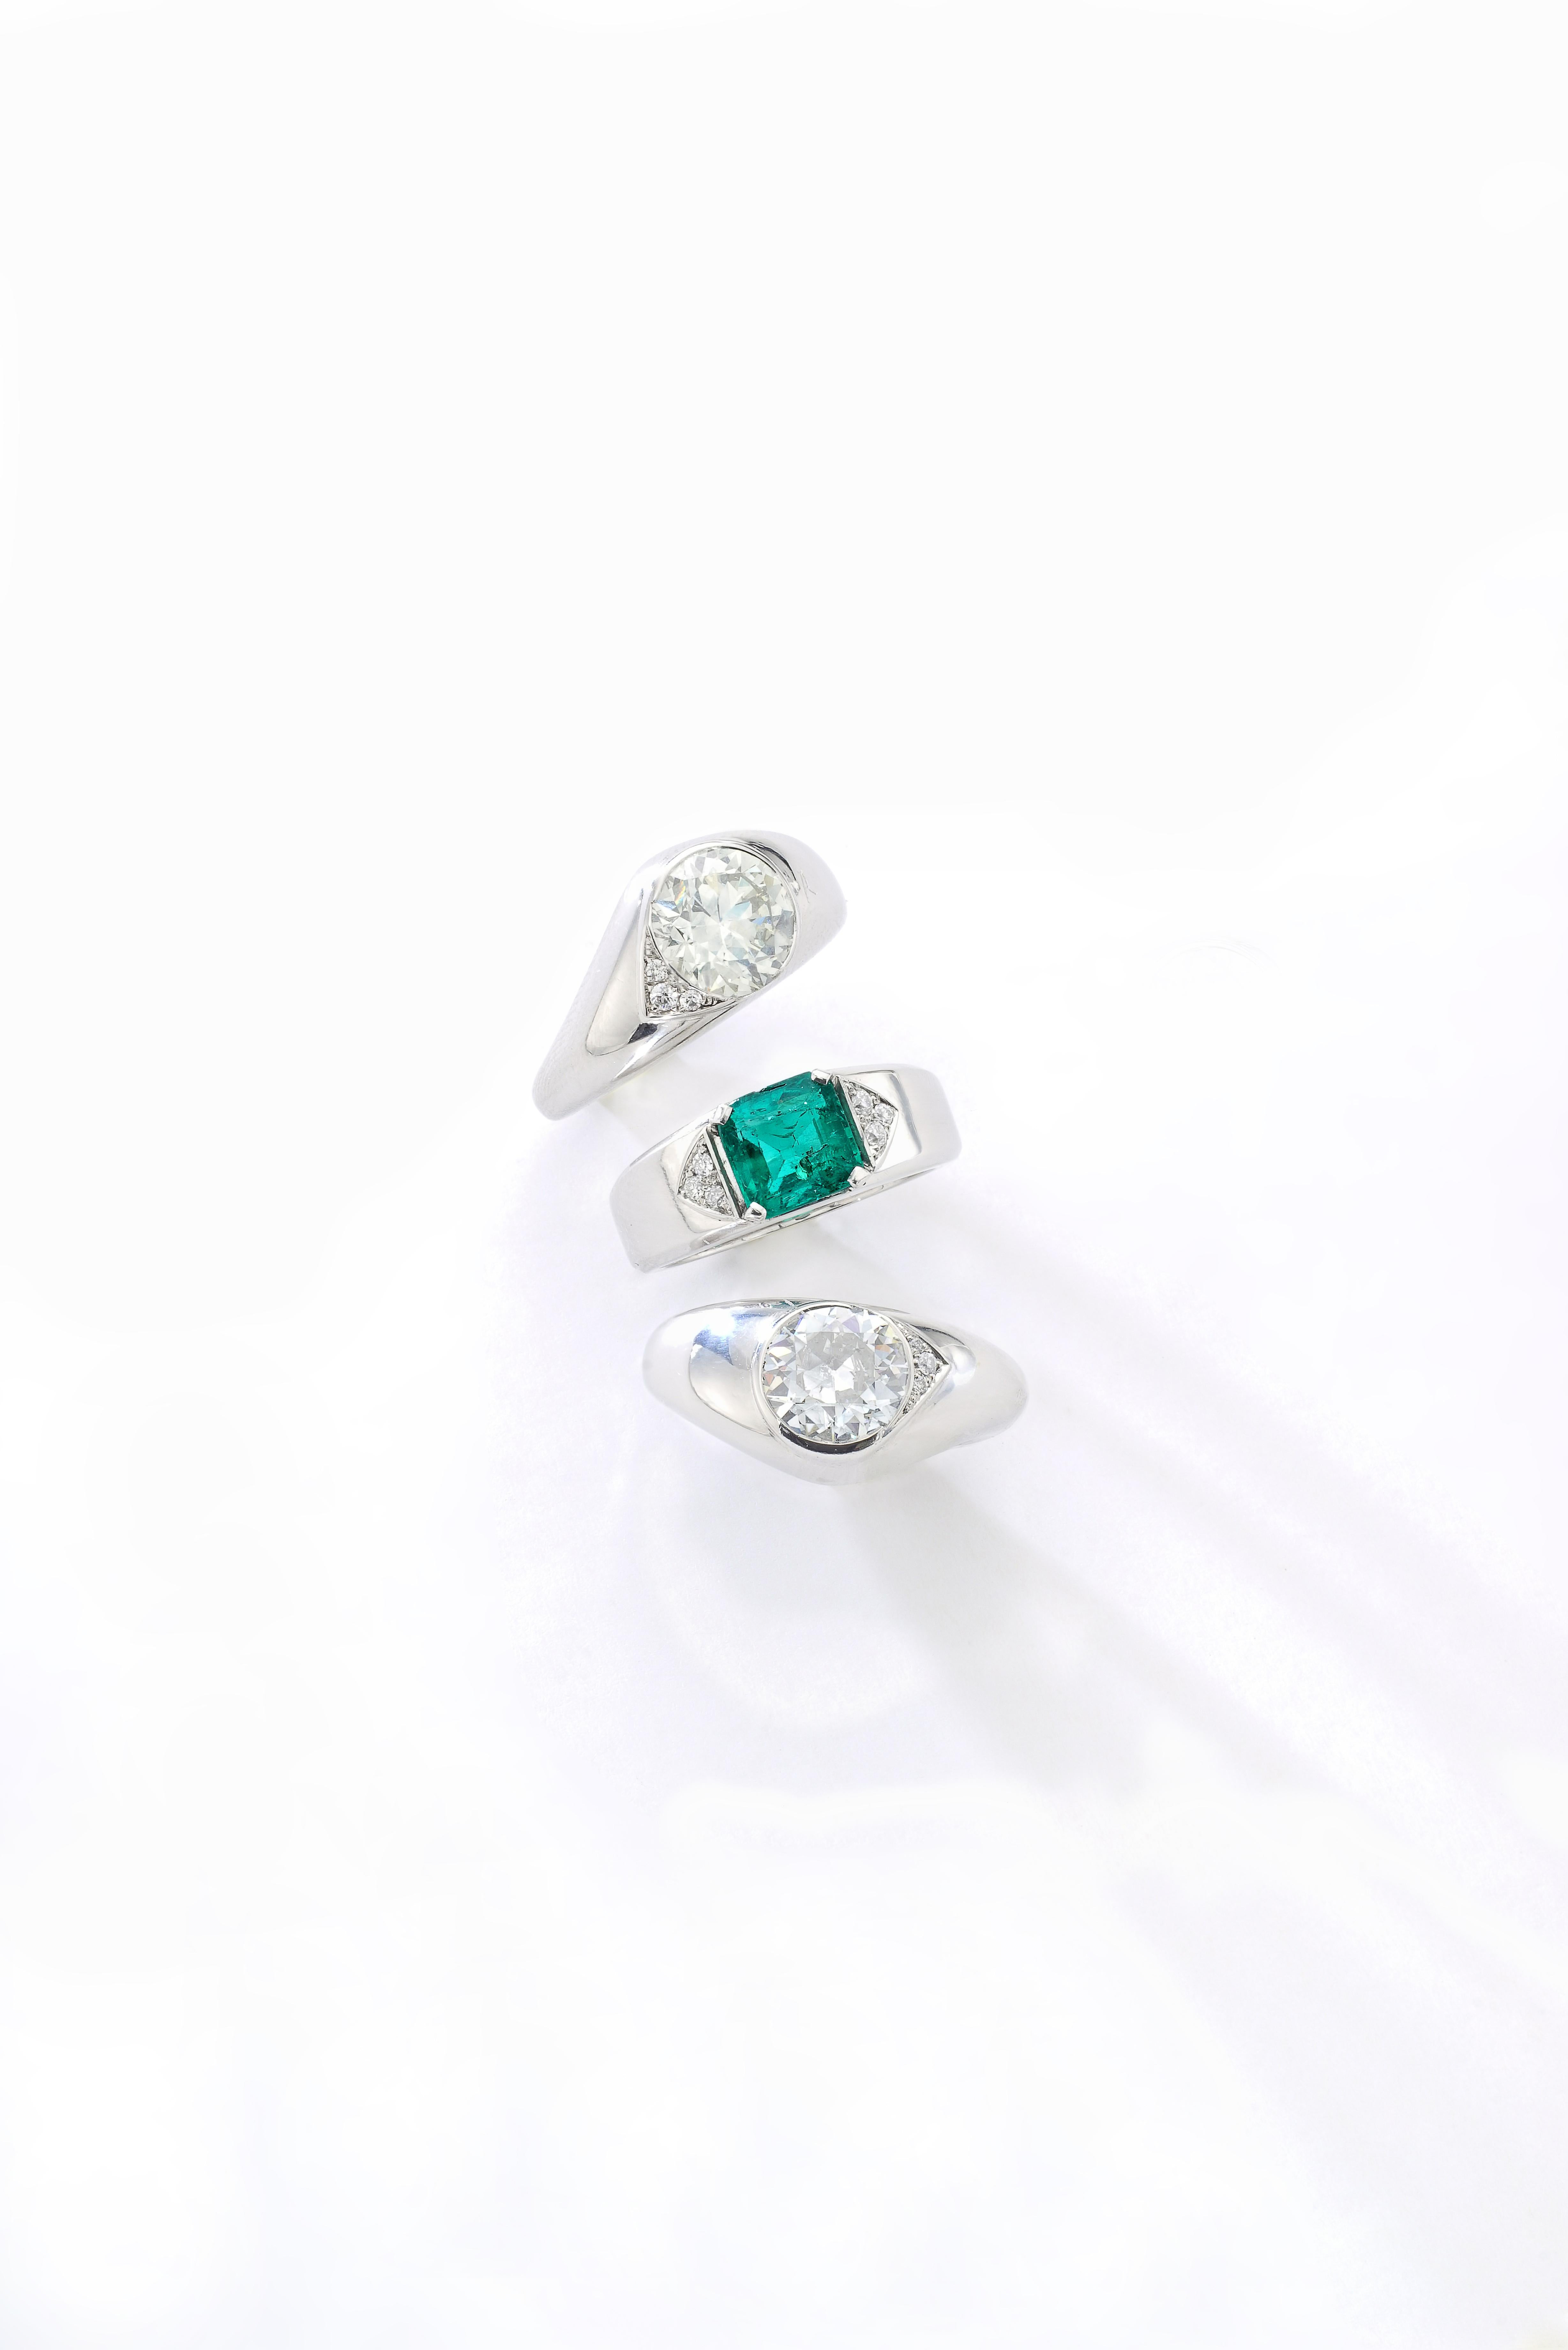 2.90 carat approx. / 1.97 carat approx. Diamonds / 1.70 carat approx. Emerald Old Mine Colombian exceptional green color on platinum surrounded by small diamonds. 
Three Rings can be worn altogether or splitted.
French marks.
Size 51.